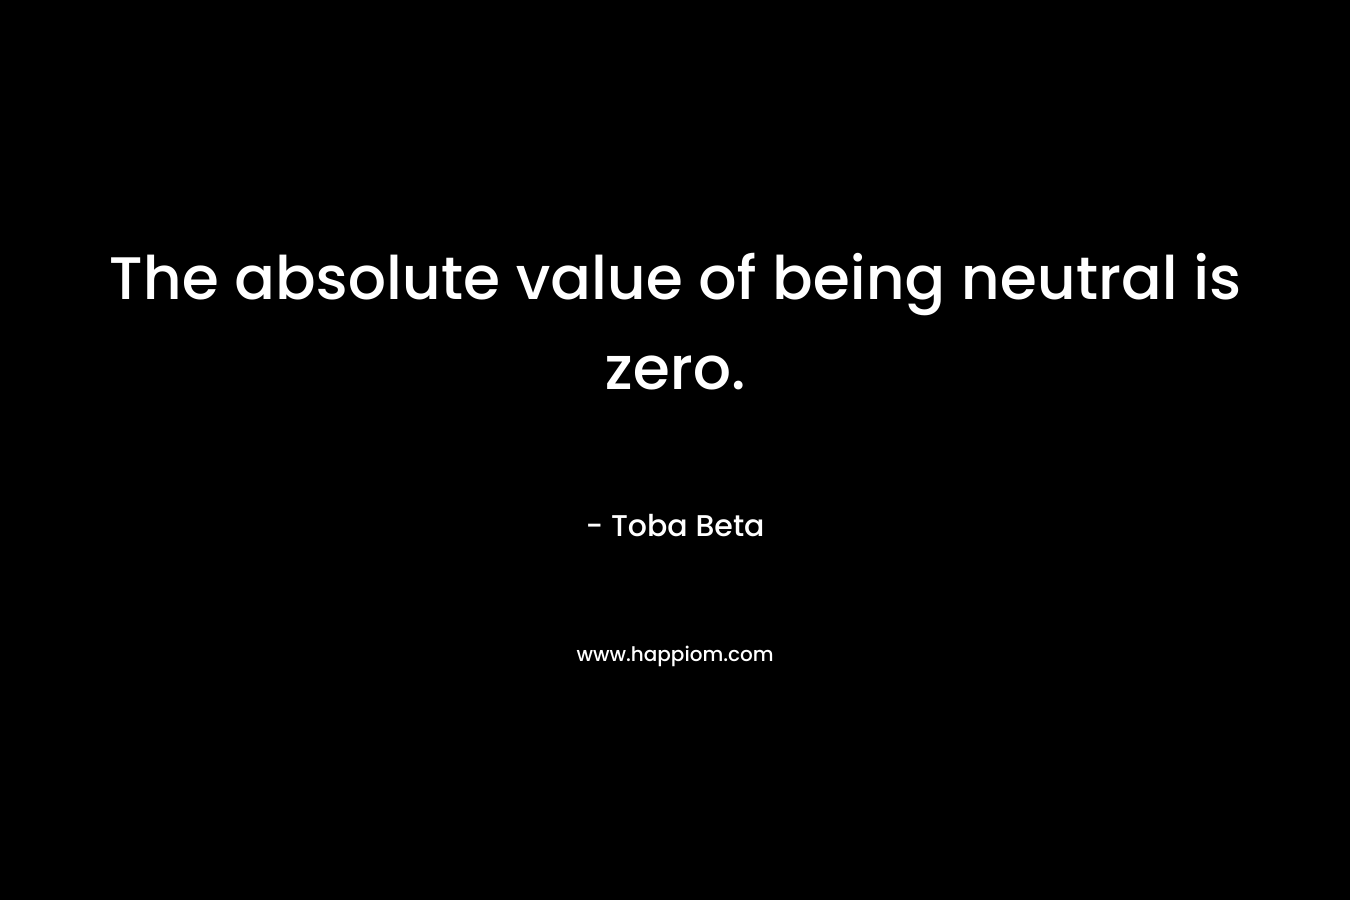 The absolute value of being neutral is zero. – Toba Beta